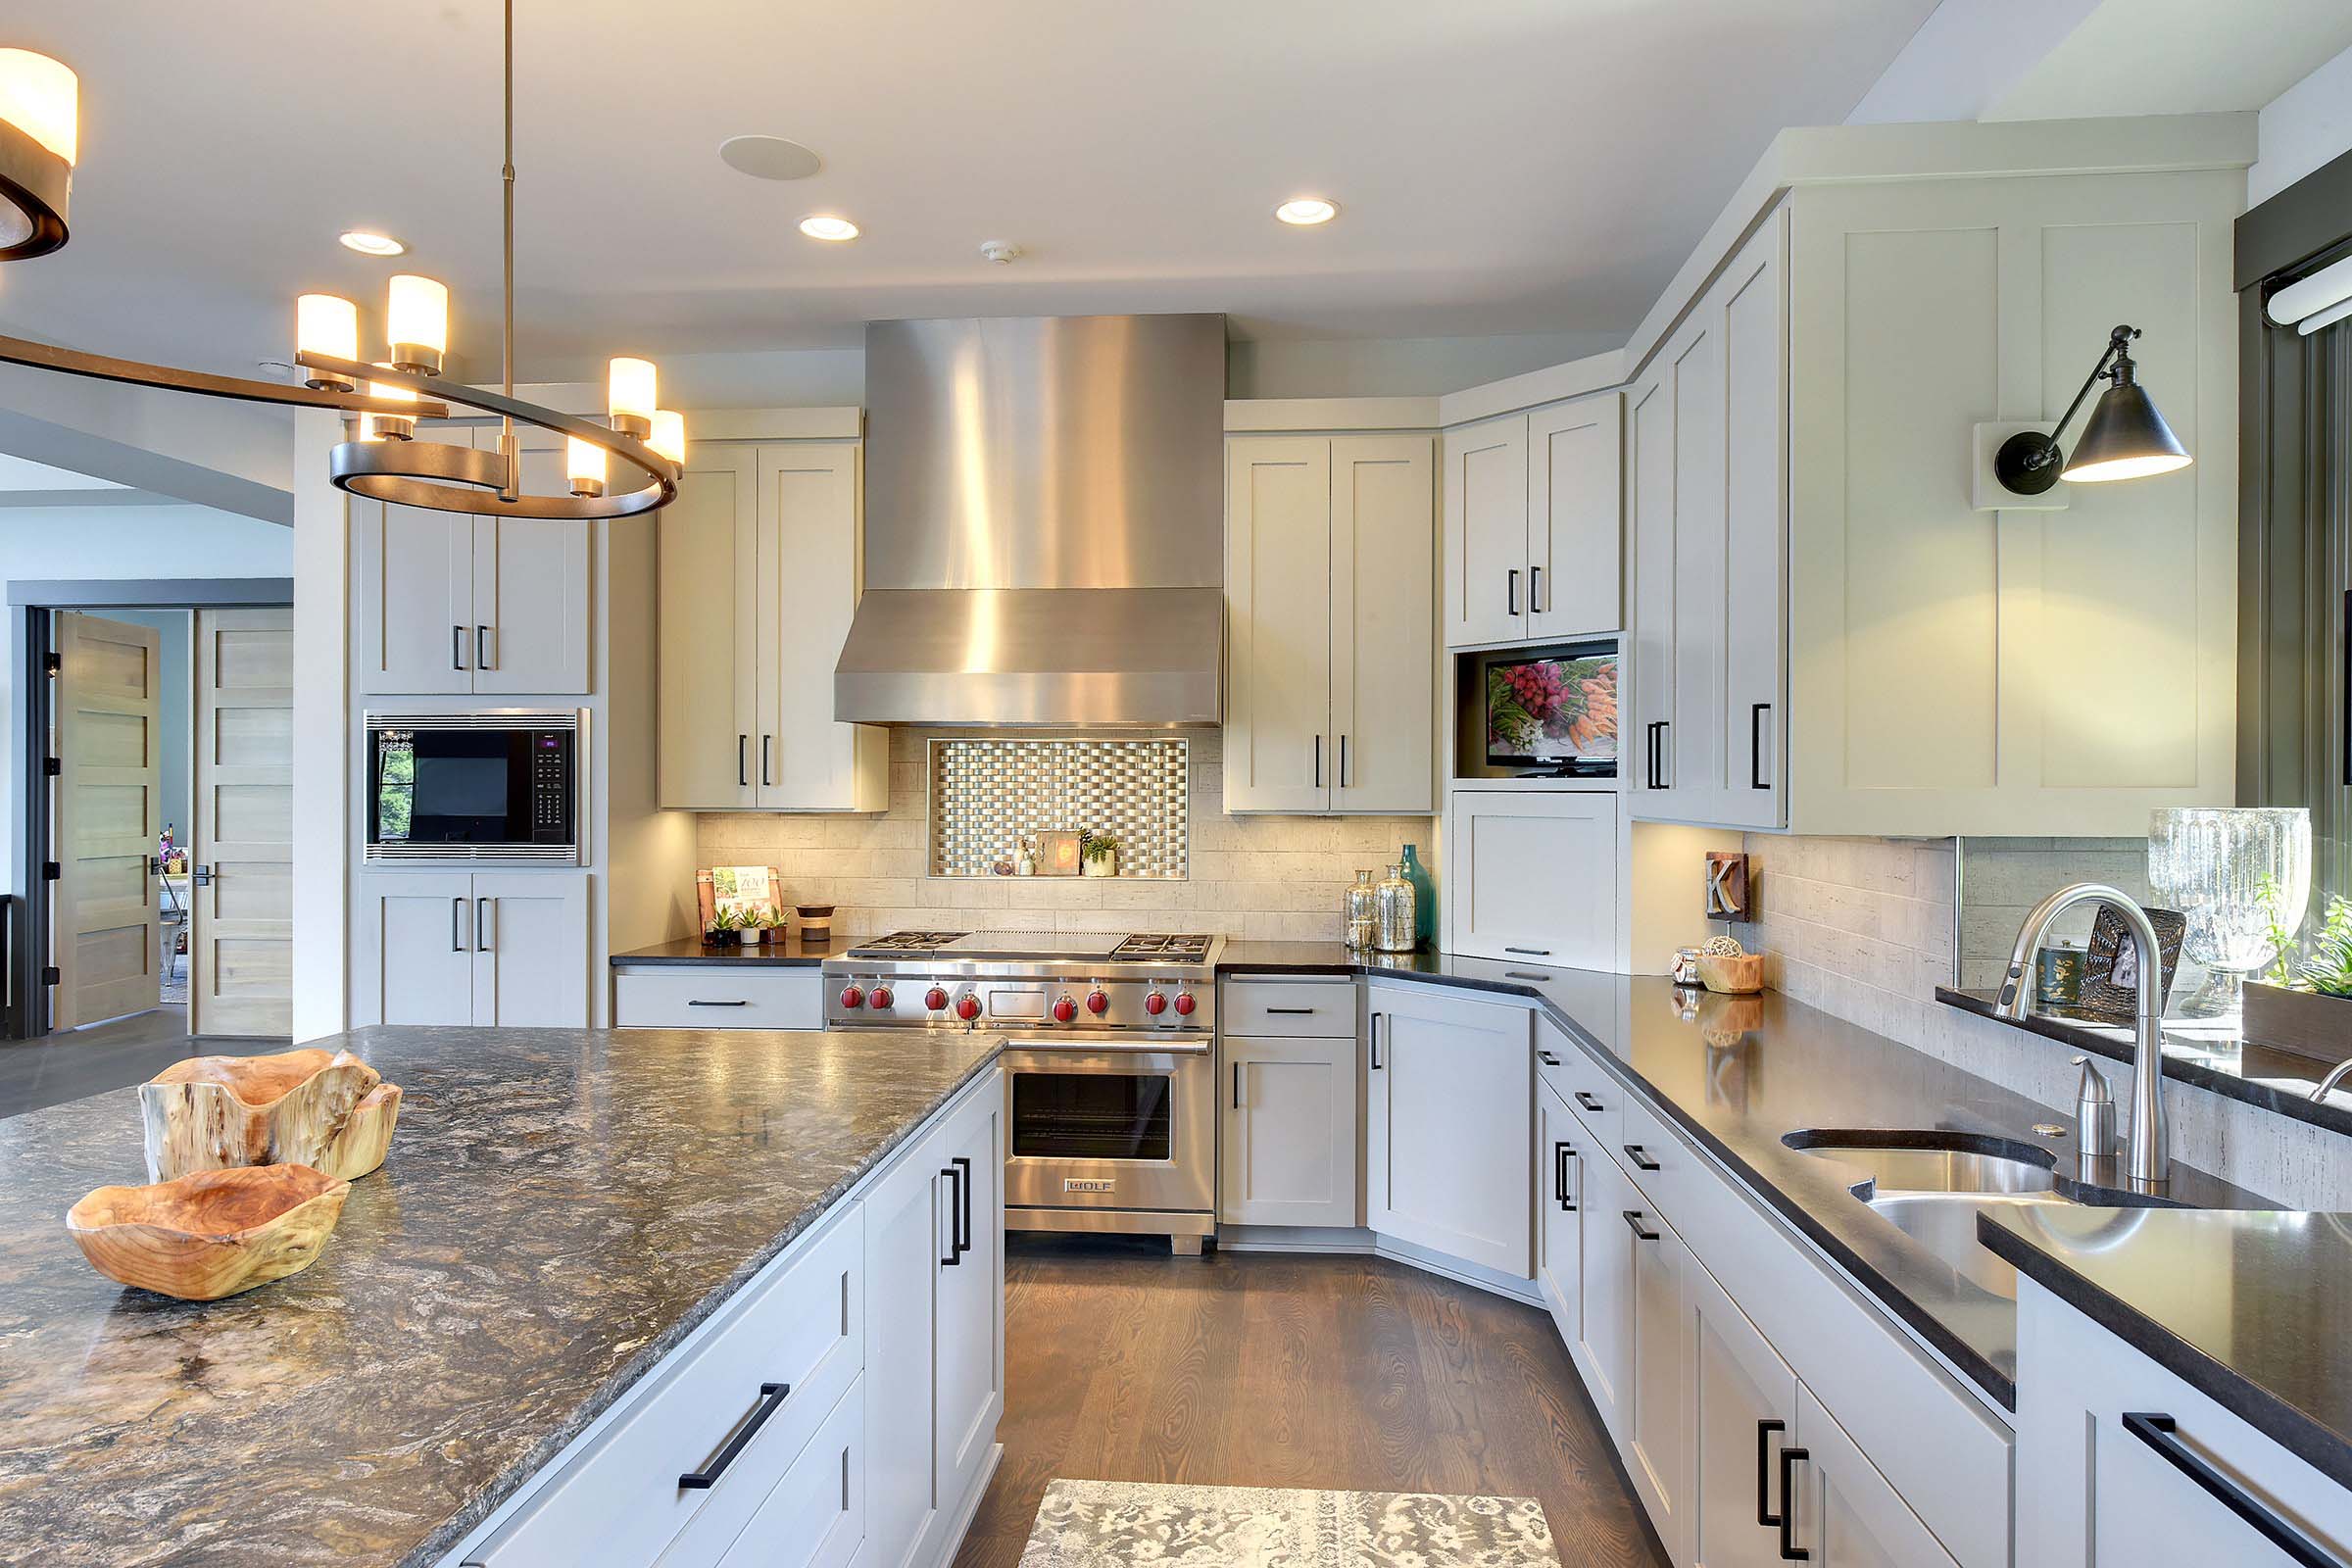 Kitchens portfolio showcasing a stunning kitchen with white cabinets and granite counter tops.